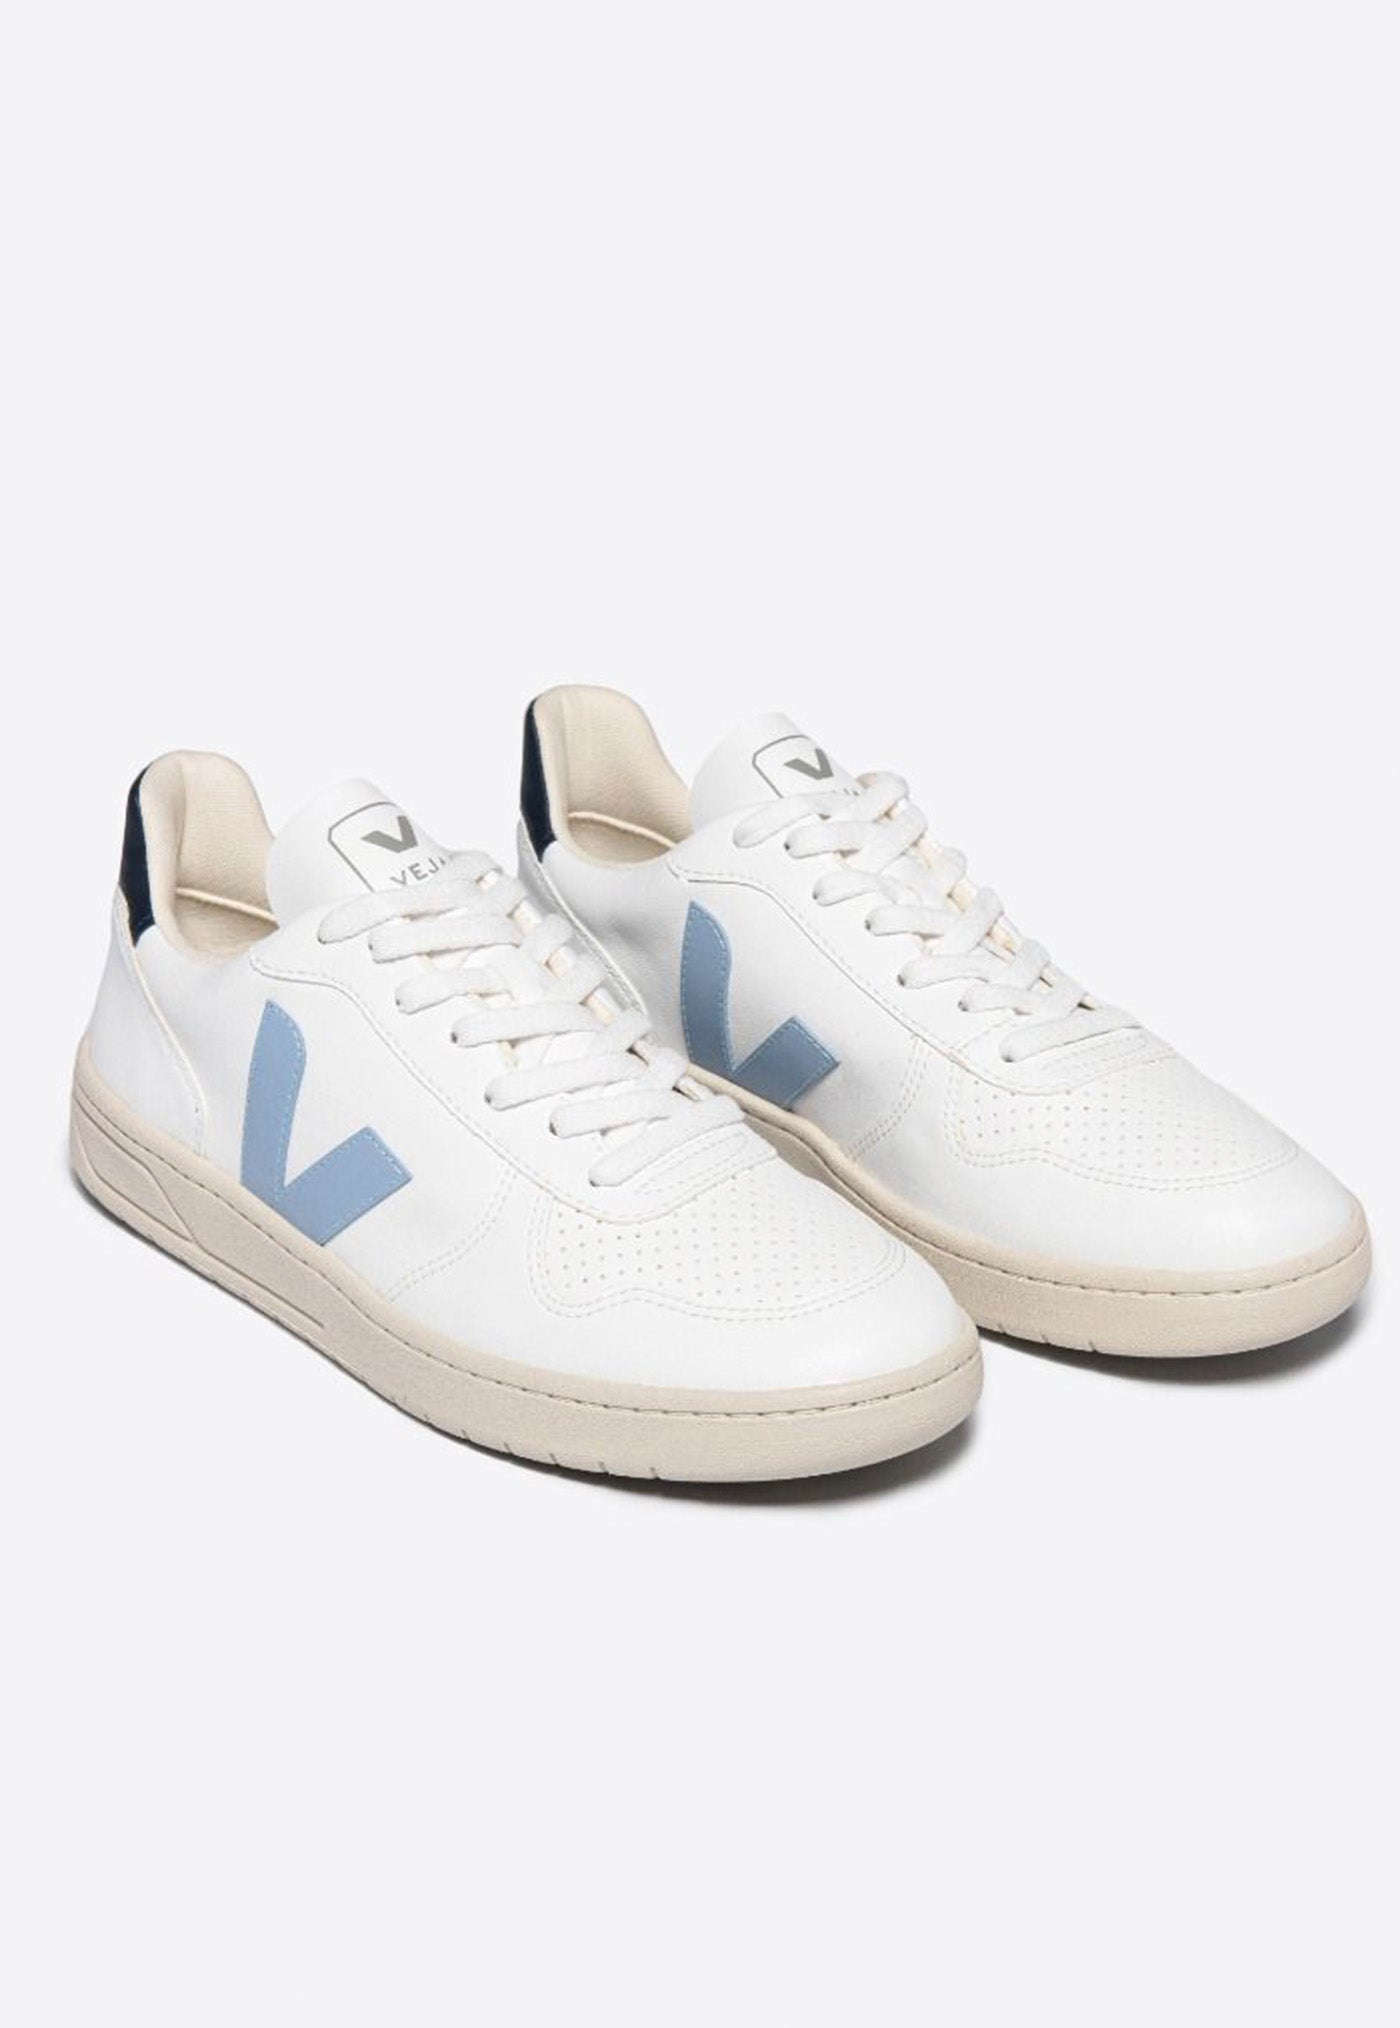 V-10 CWL Sneakers - White/Steel/Nautico sold by Angel Divine